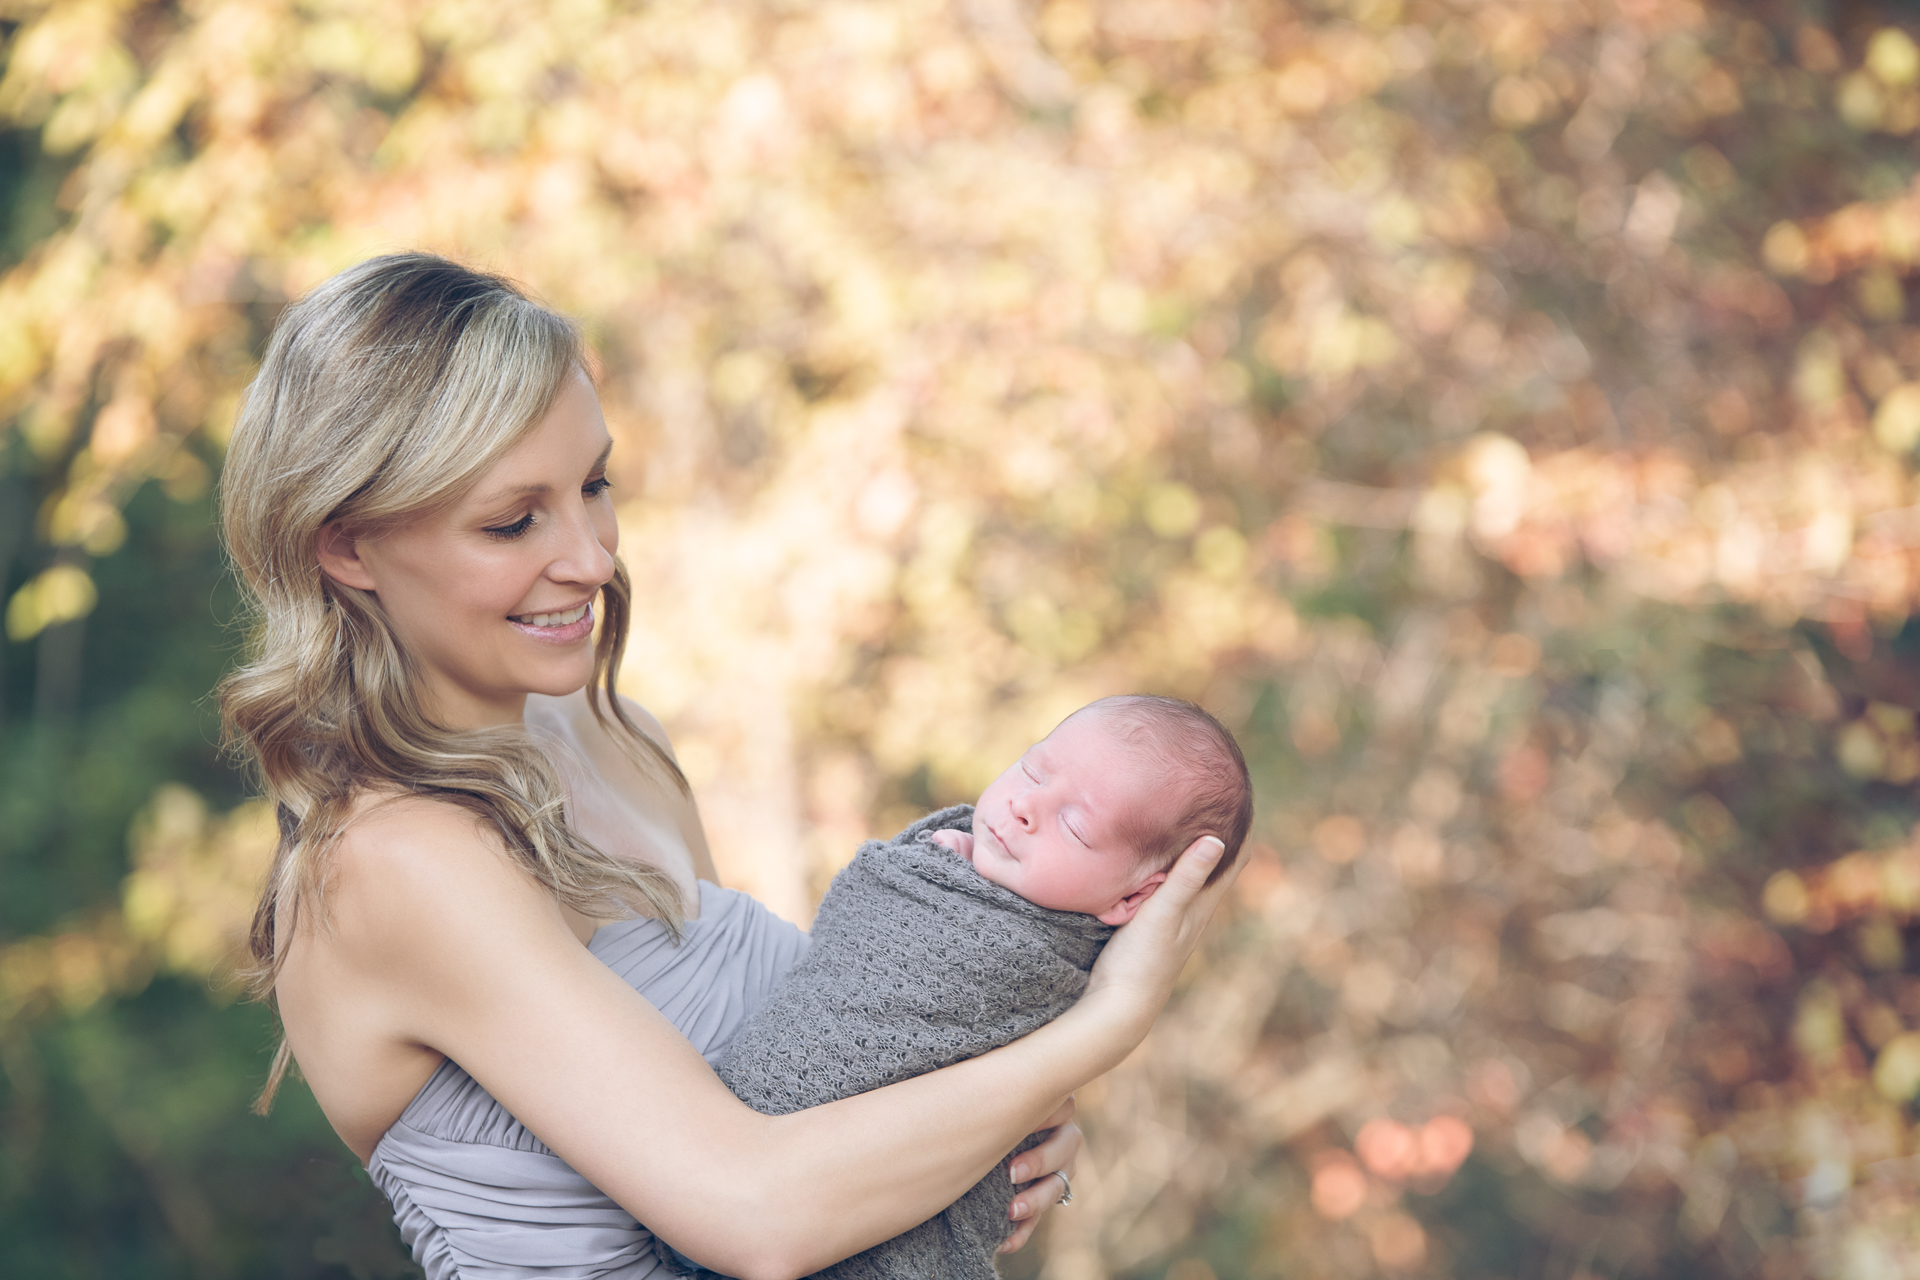 Woman on a gray dress holds her newborn son during fall season outdoors.